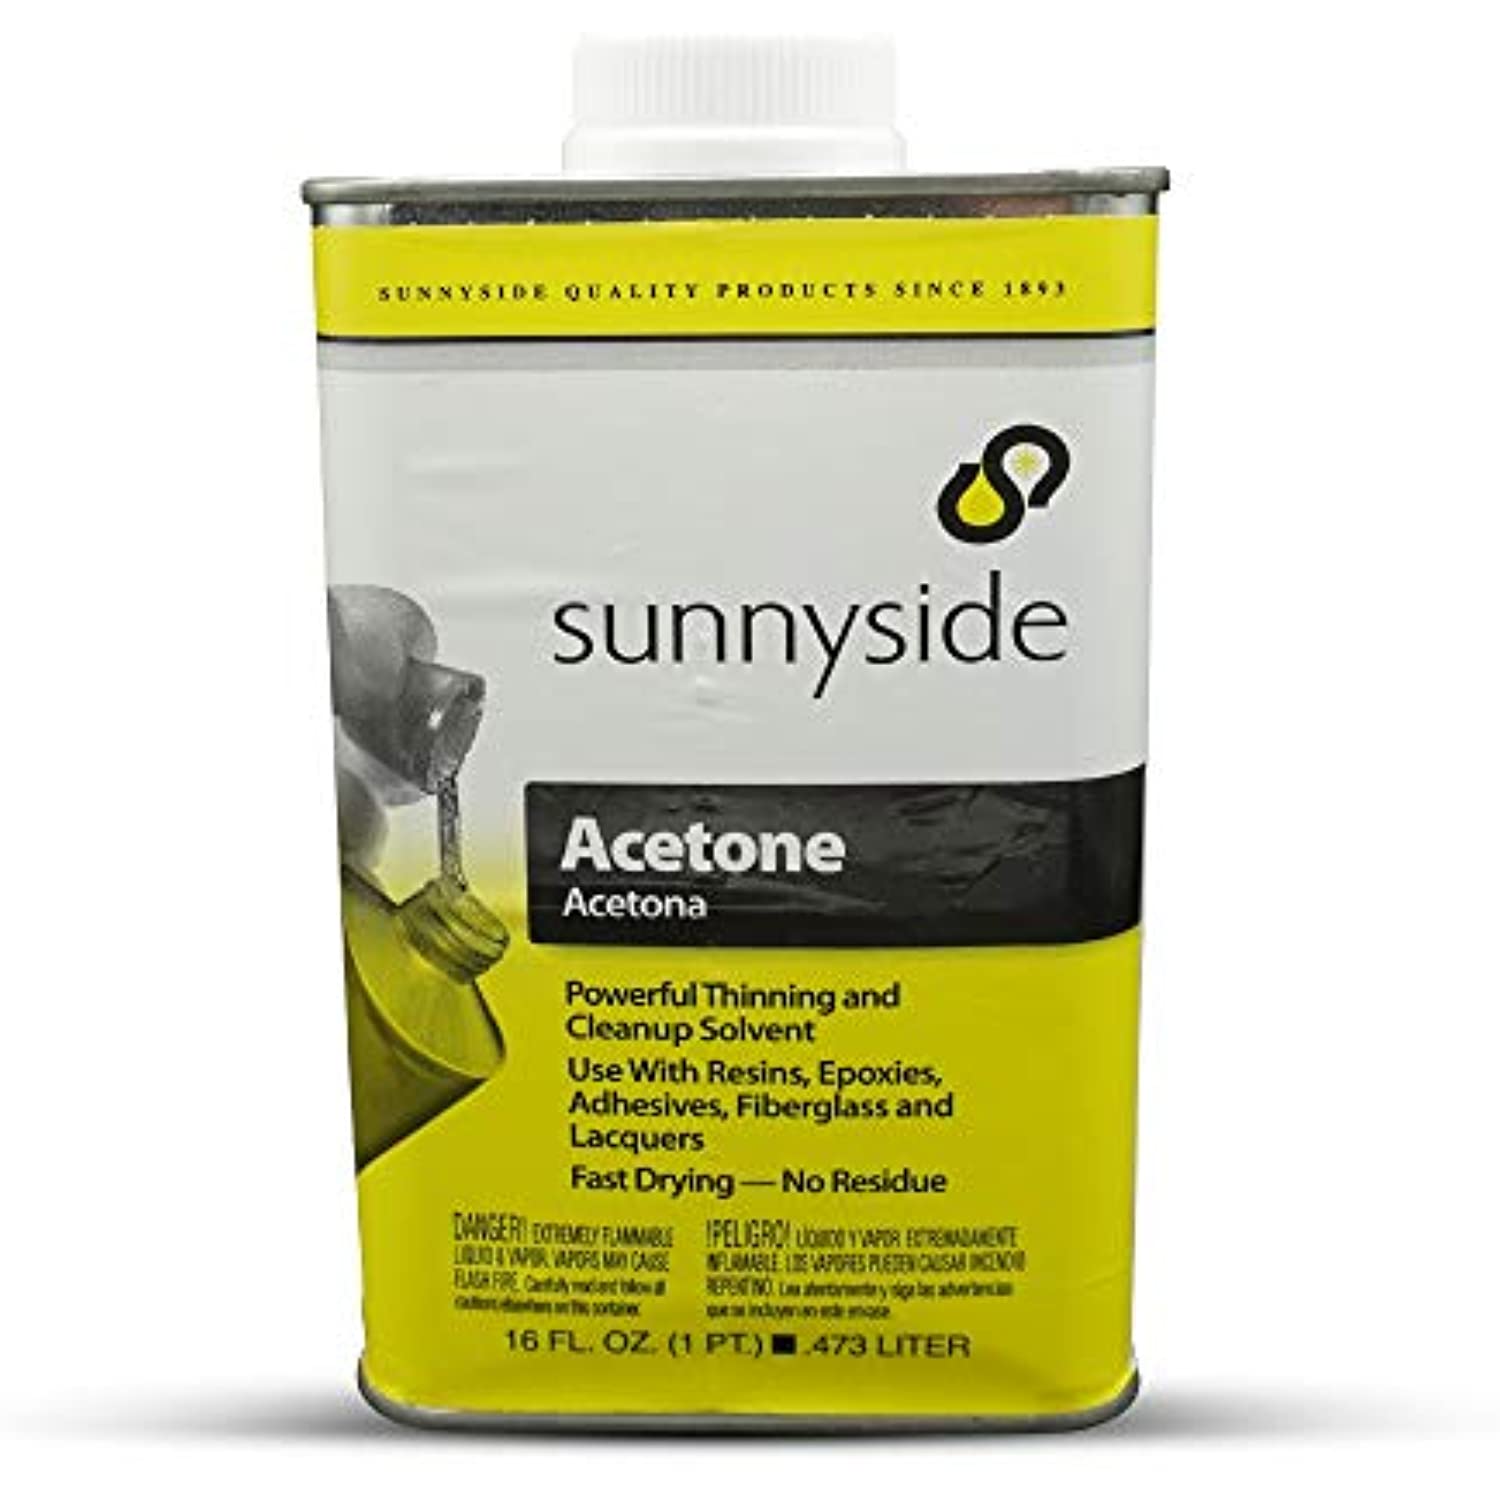 Sunnyside 1-Pint Acetone with Centaurus AZ Resistant Glove for Cosmetics Textiles Automotive Colorless Cleanup Dried Latex Epoxy Fiberglass Resins Ink Rust Adhesives Lacquers Fast Drying No Residue